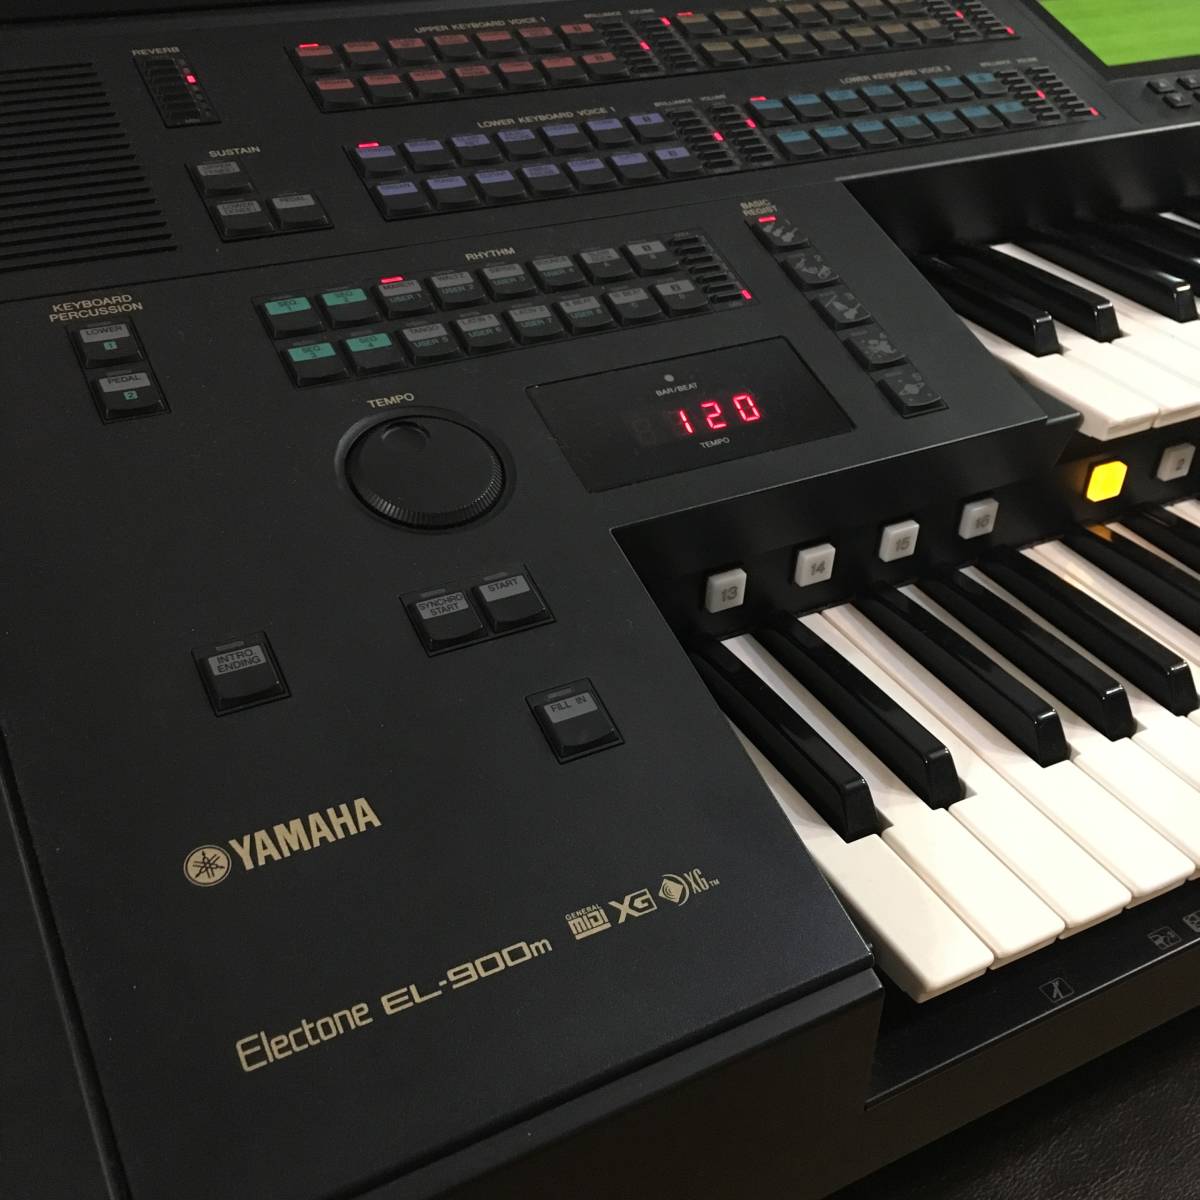  Yamaha electone EL900m used [ direct pickup welcome ] practice to floppy disk operation verification ending keyboard maintenance settled .STAGEA(. front model )